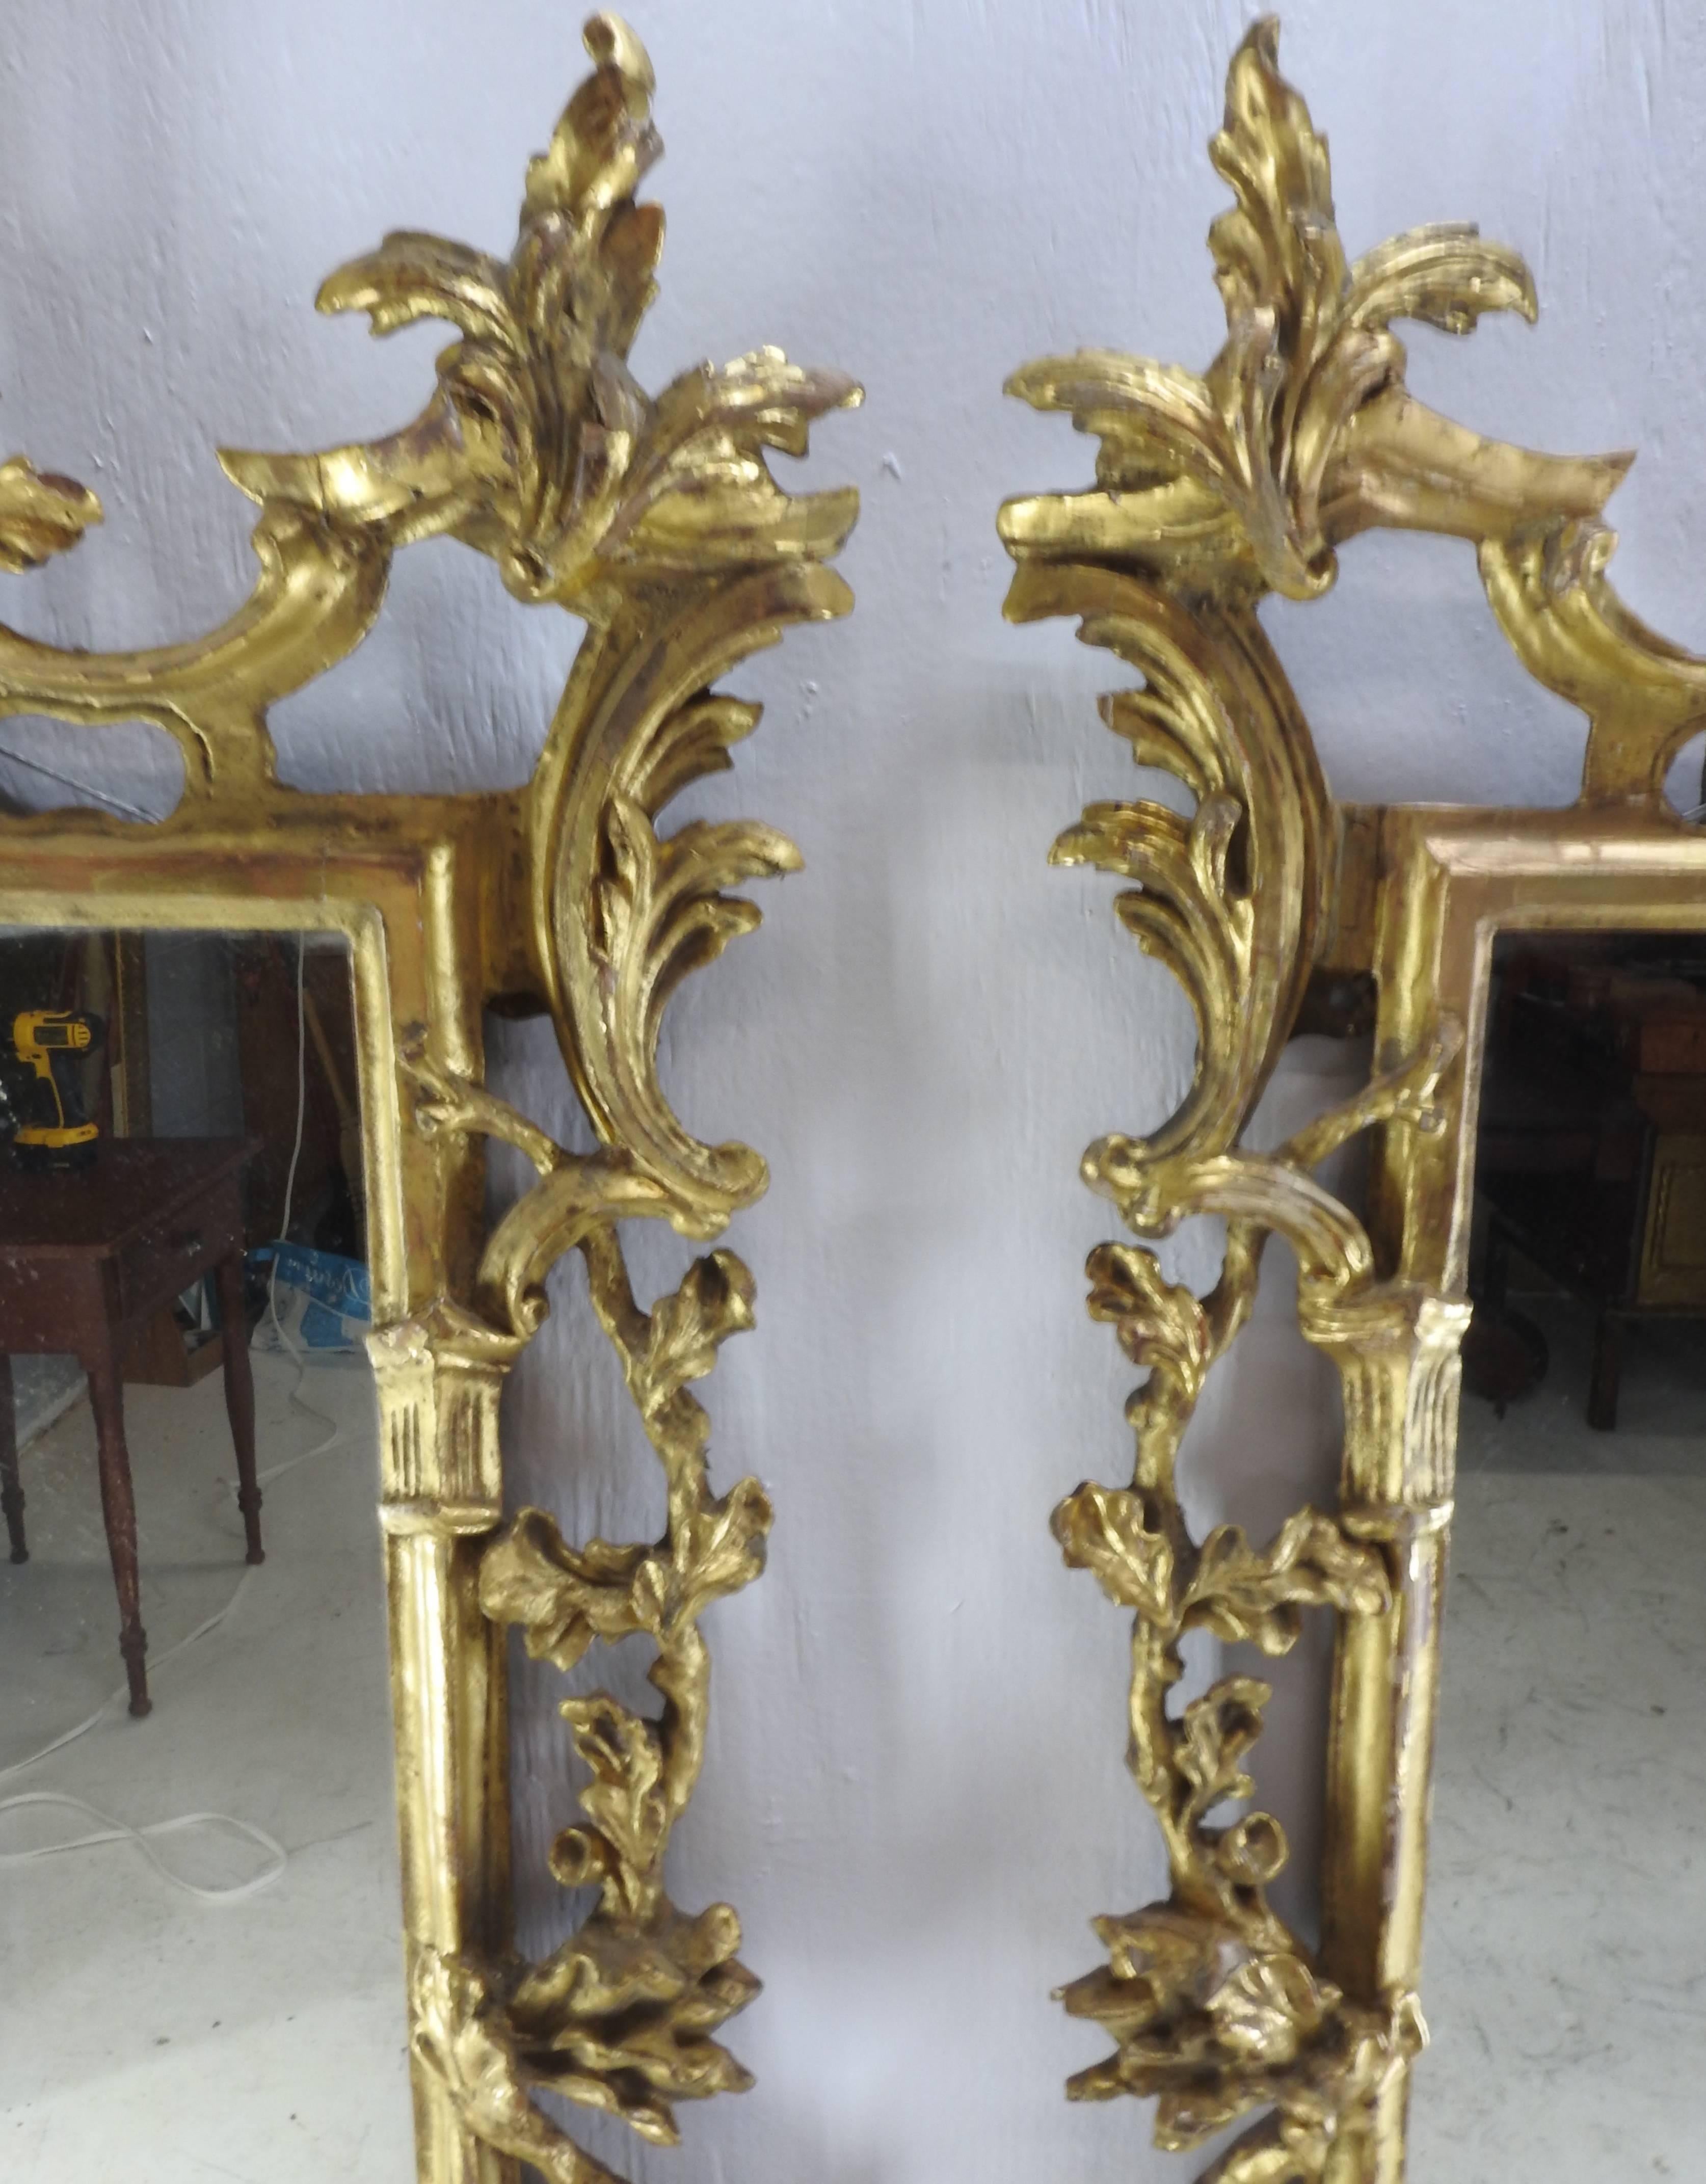 Great Britain (UK) Pair of George III Bright Gilt Mirrors For Sale